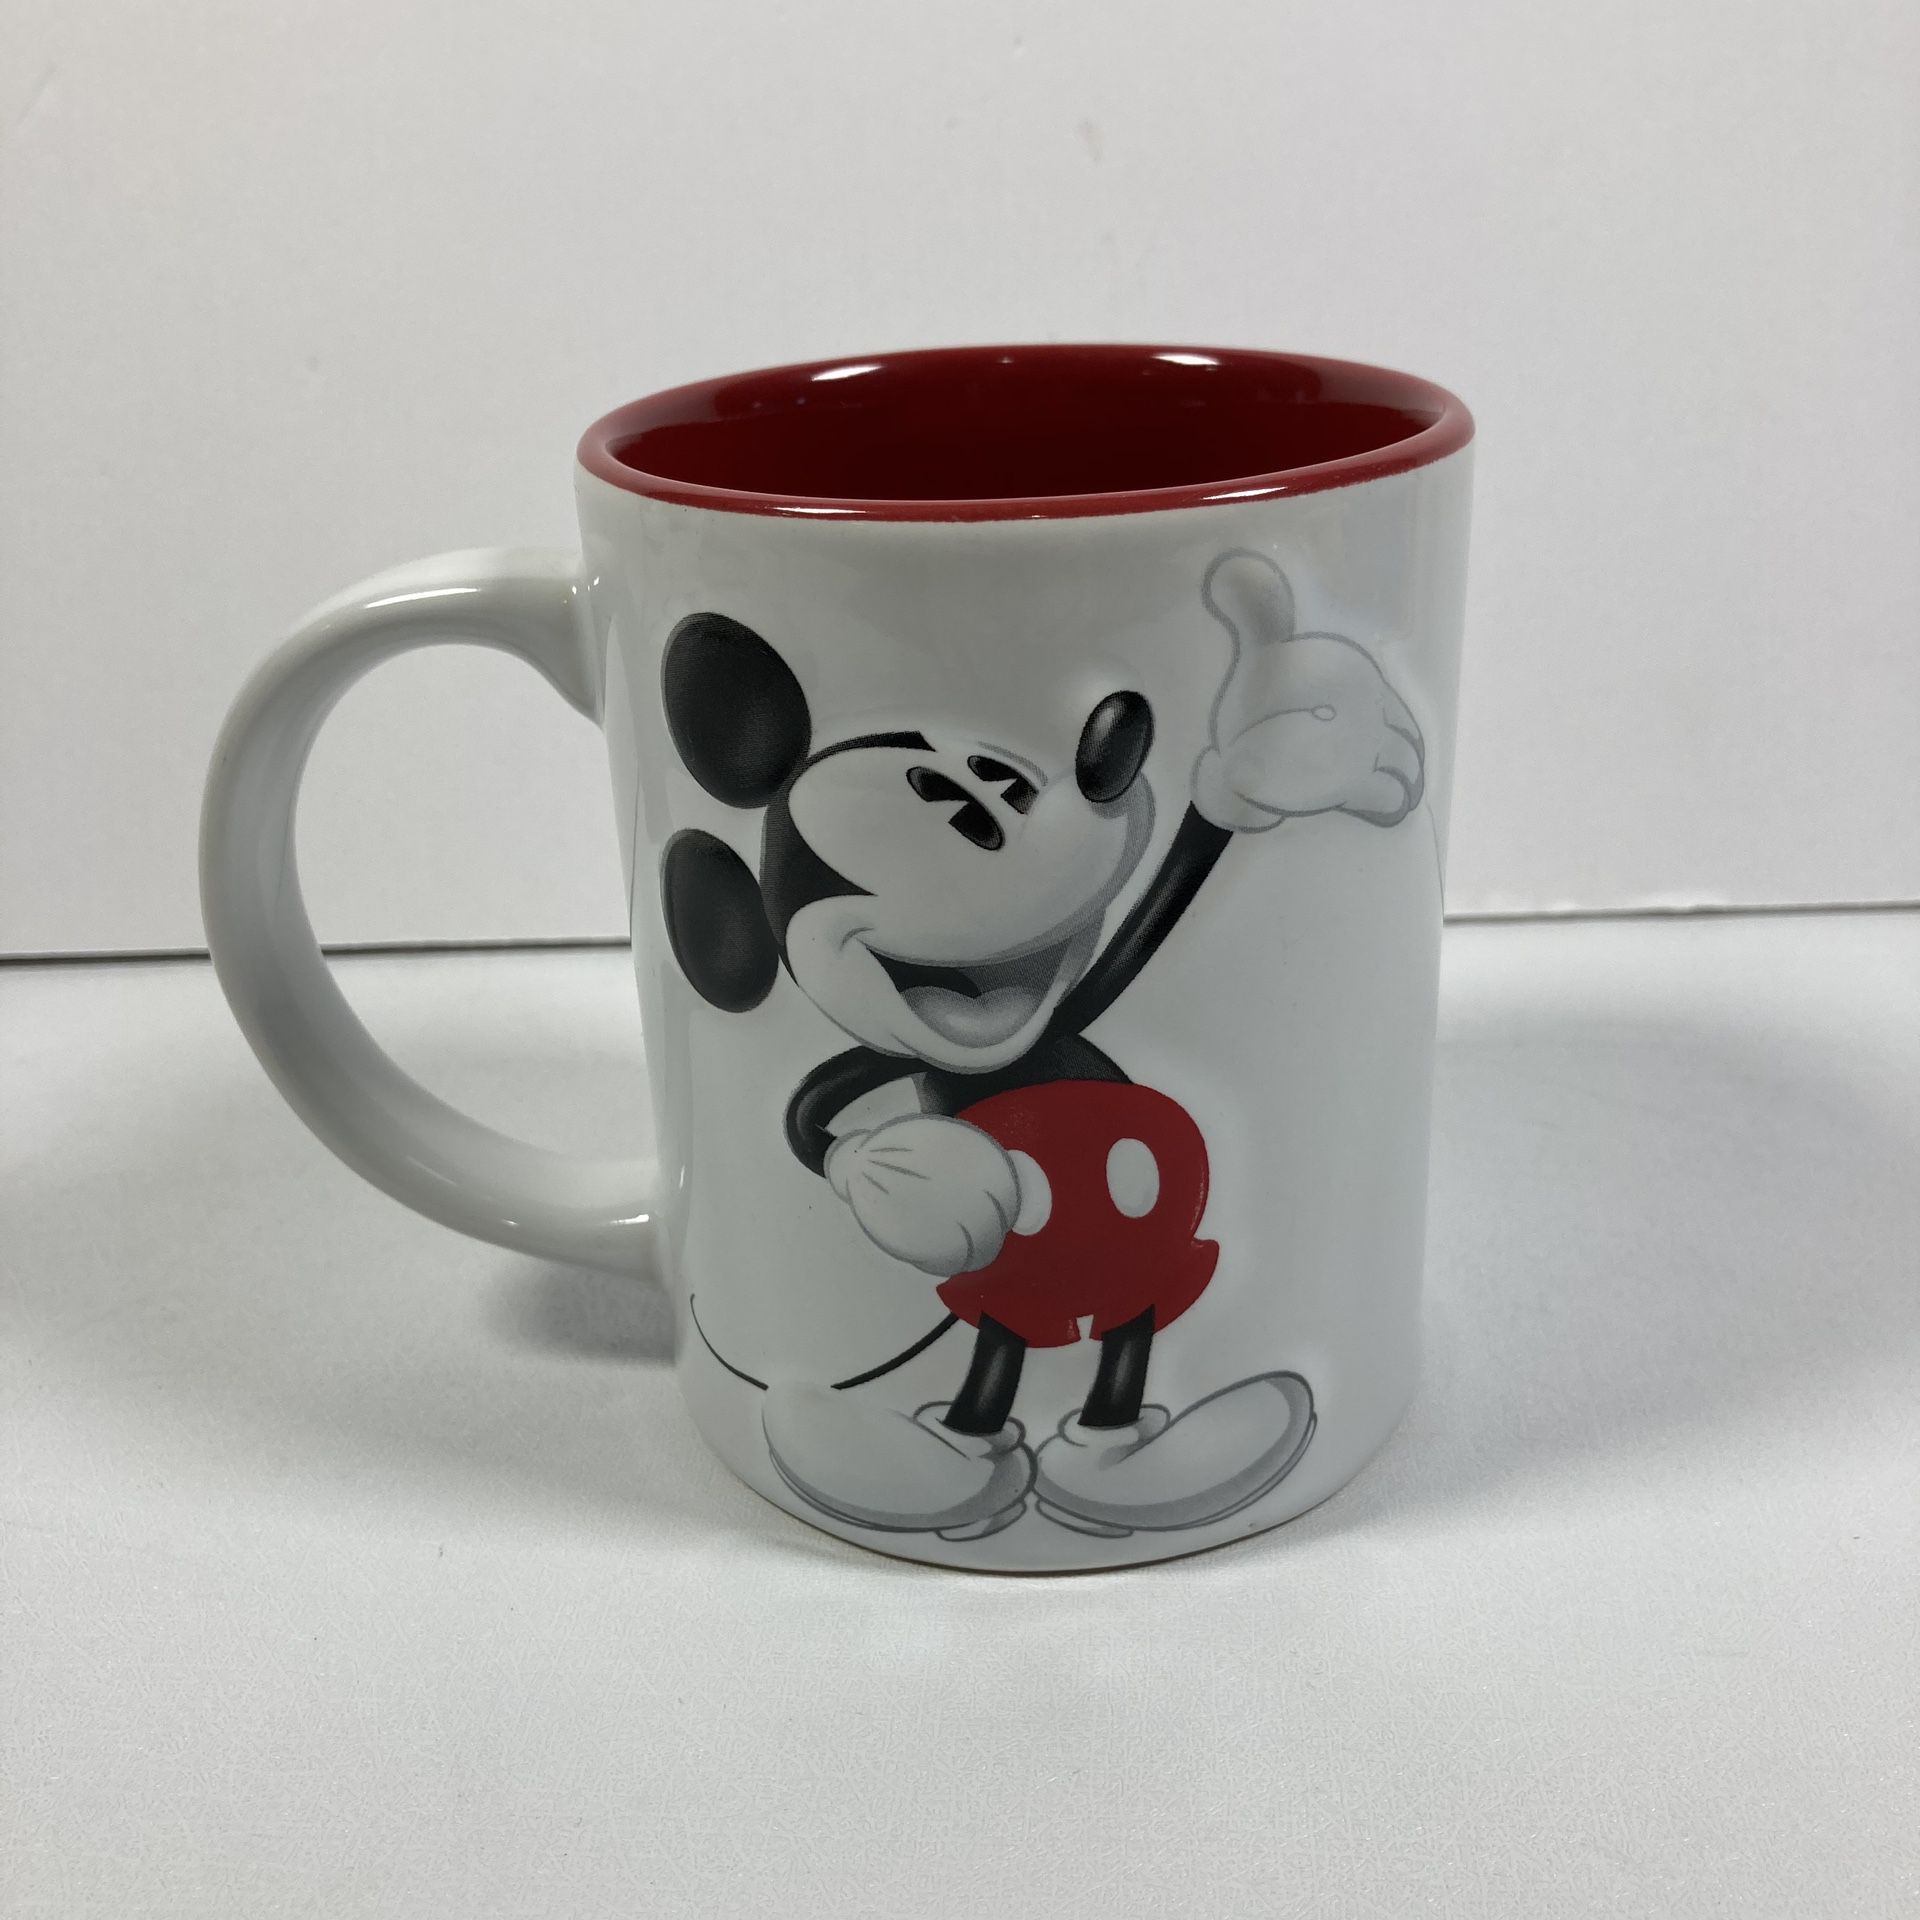 Disney Jerry Leigh White Mickey Mouse Large Ceramic Coffee Mug Cup.